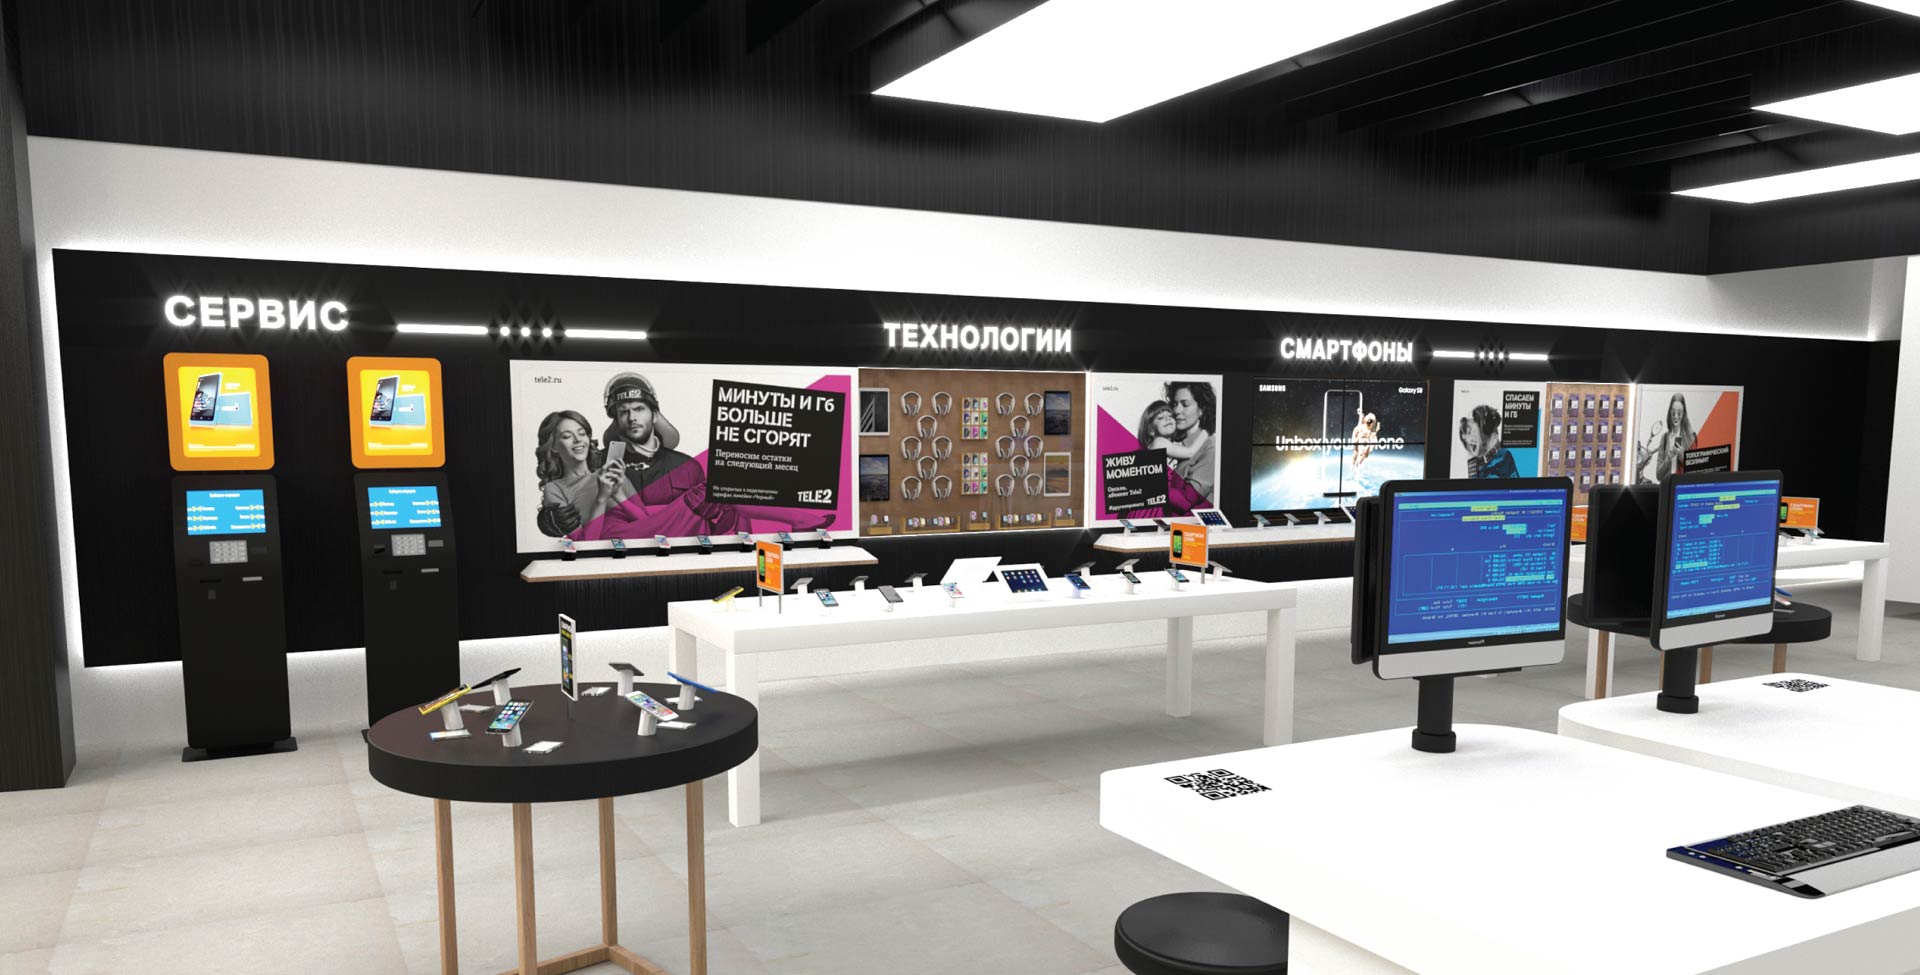 Tele2 telecoms and technology new store design Russia